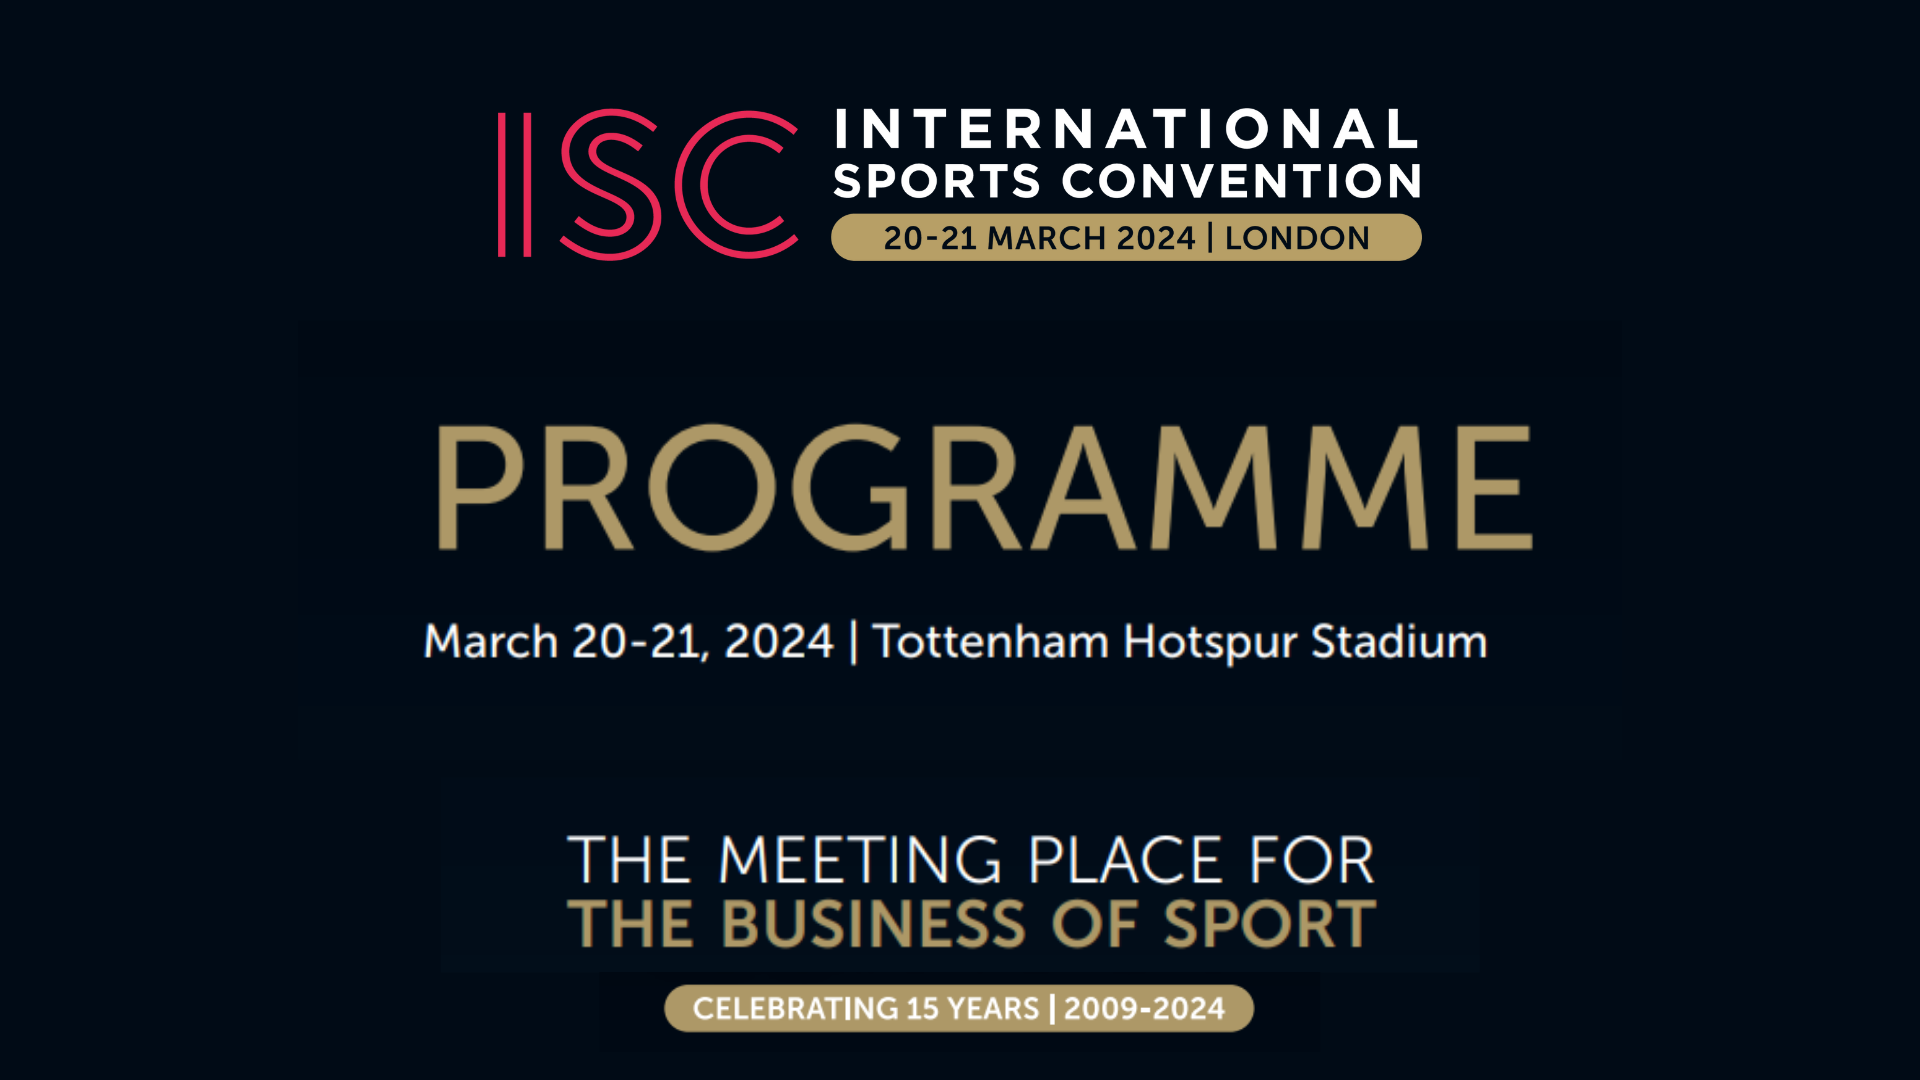 Full Programme And Agenda Announced For International Sports Convention